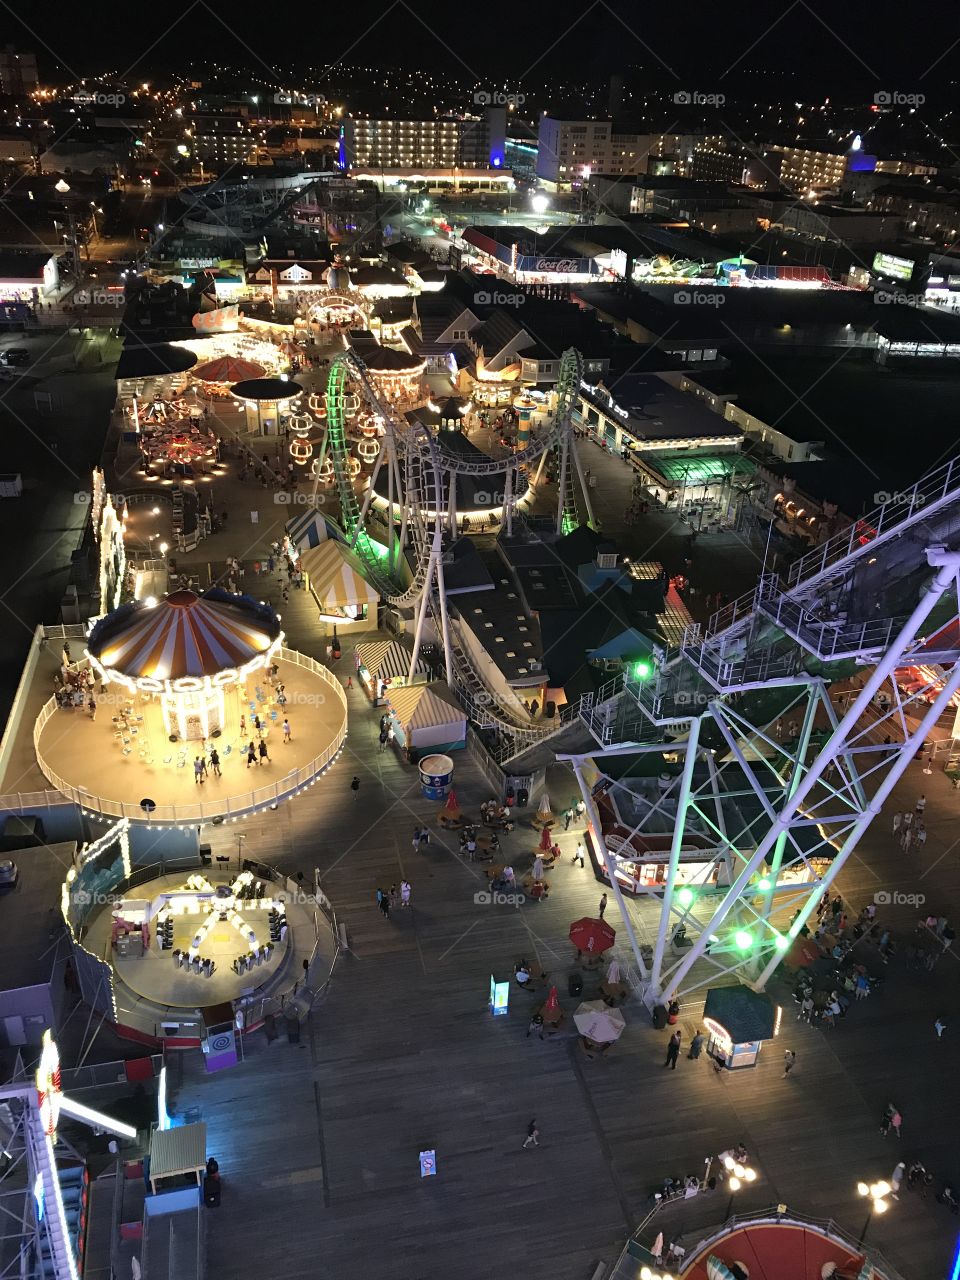 Morey’s Pier view from the Ferris wheel. Night time amusement park 